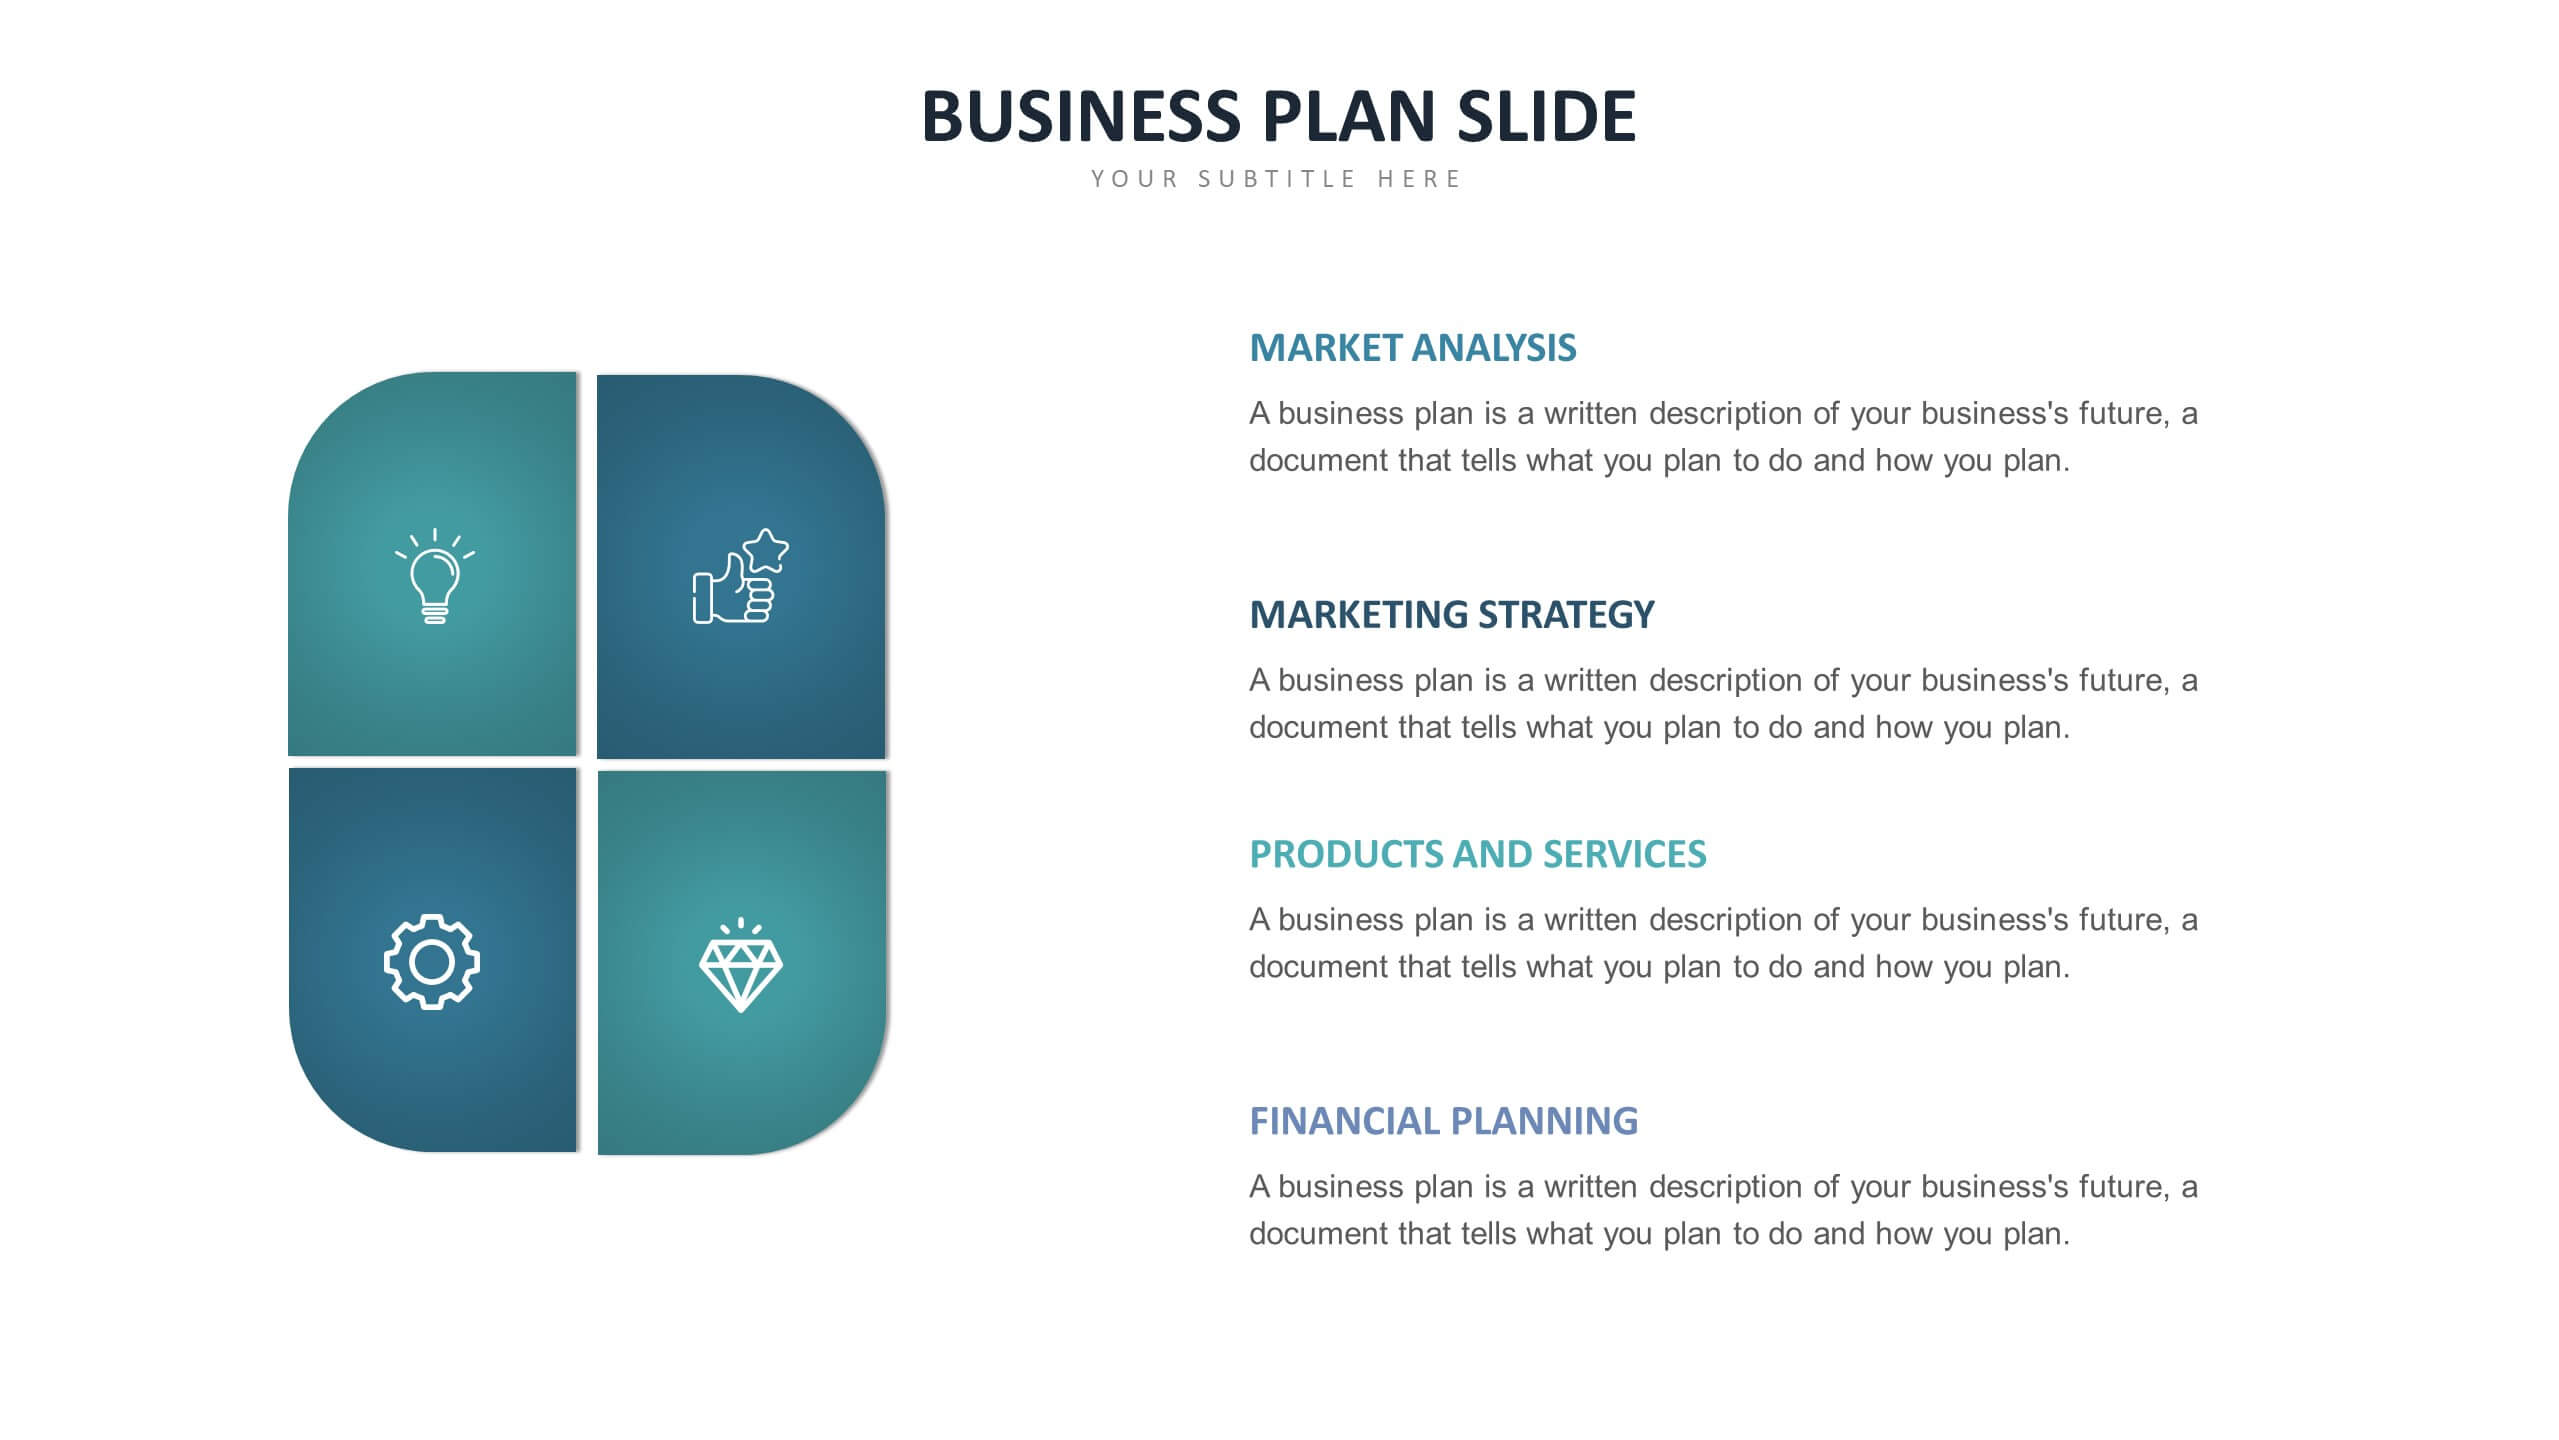 implement the business plan slideshare